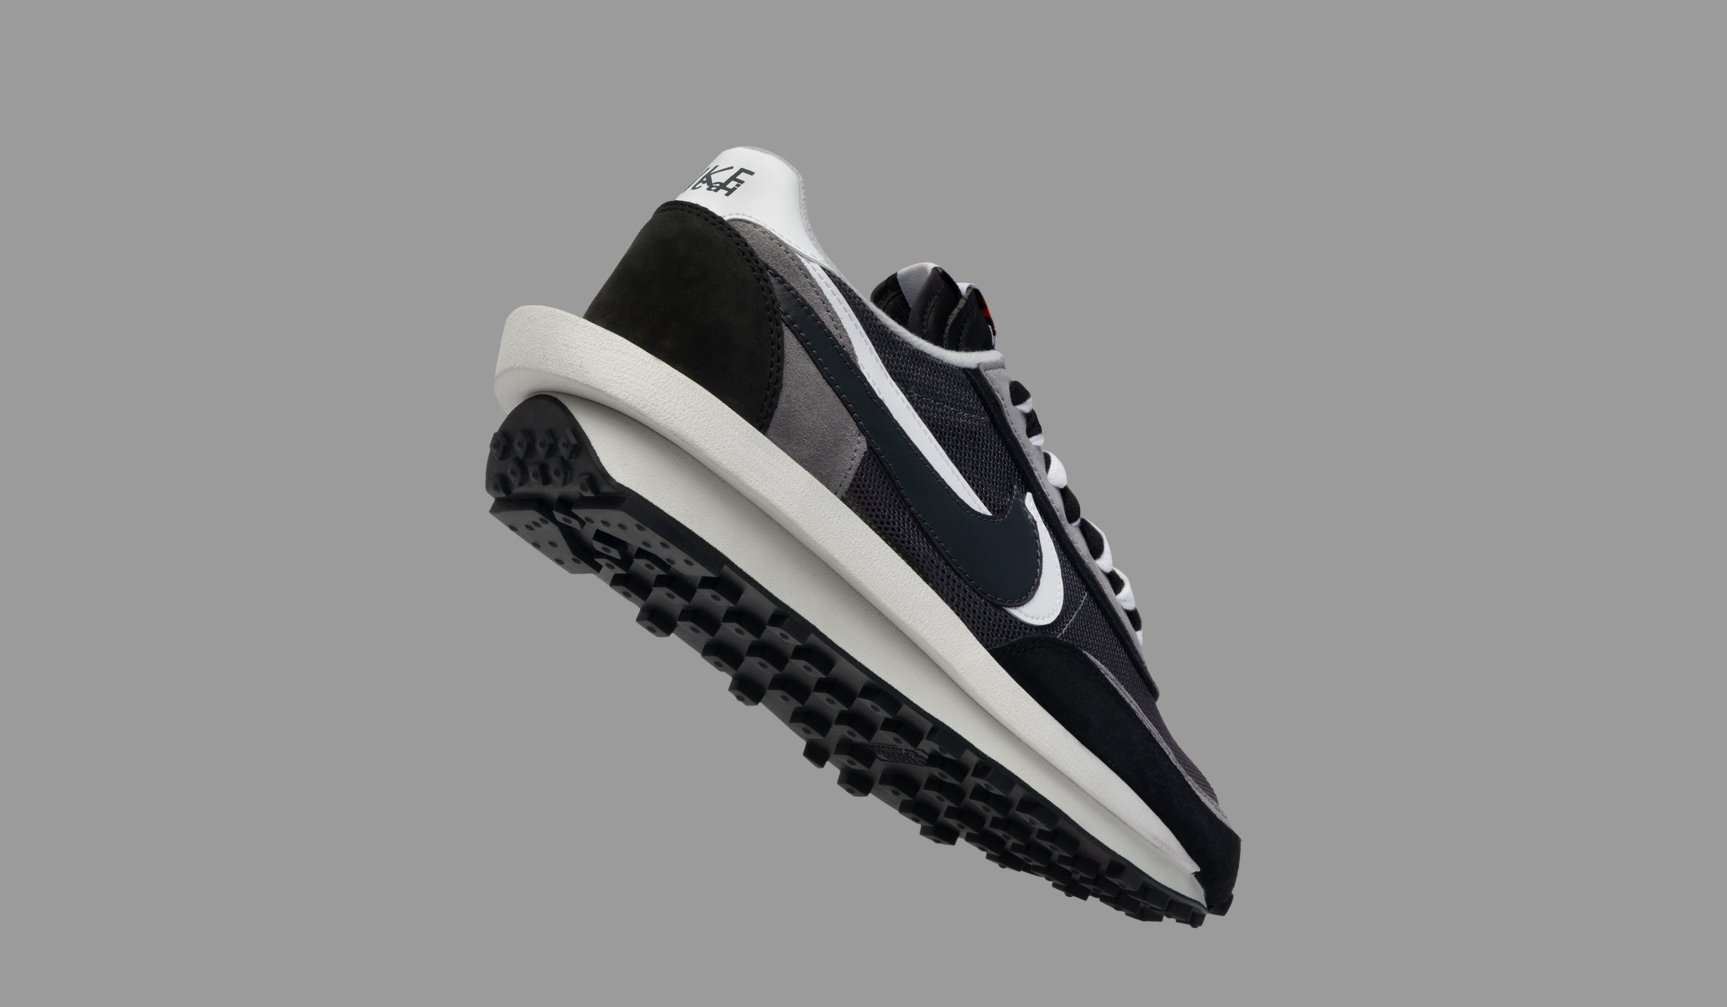 Naufragio Increíble esperanza GOAT on Twitter: "Nike and Sacai showcase a new colorway of the LDV Waffle,  blending two vintage Nike runners in a unique hybrid creation. Available on  the app and https://t.co/fZOxW7rwGu: https://t.co/qXQUHtgY2N  https://t.co/k2qtAVmEYf" /